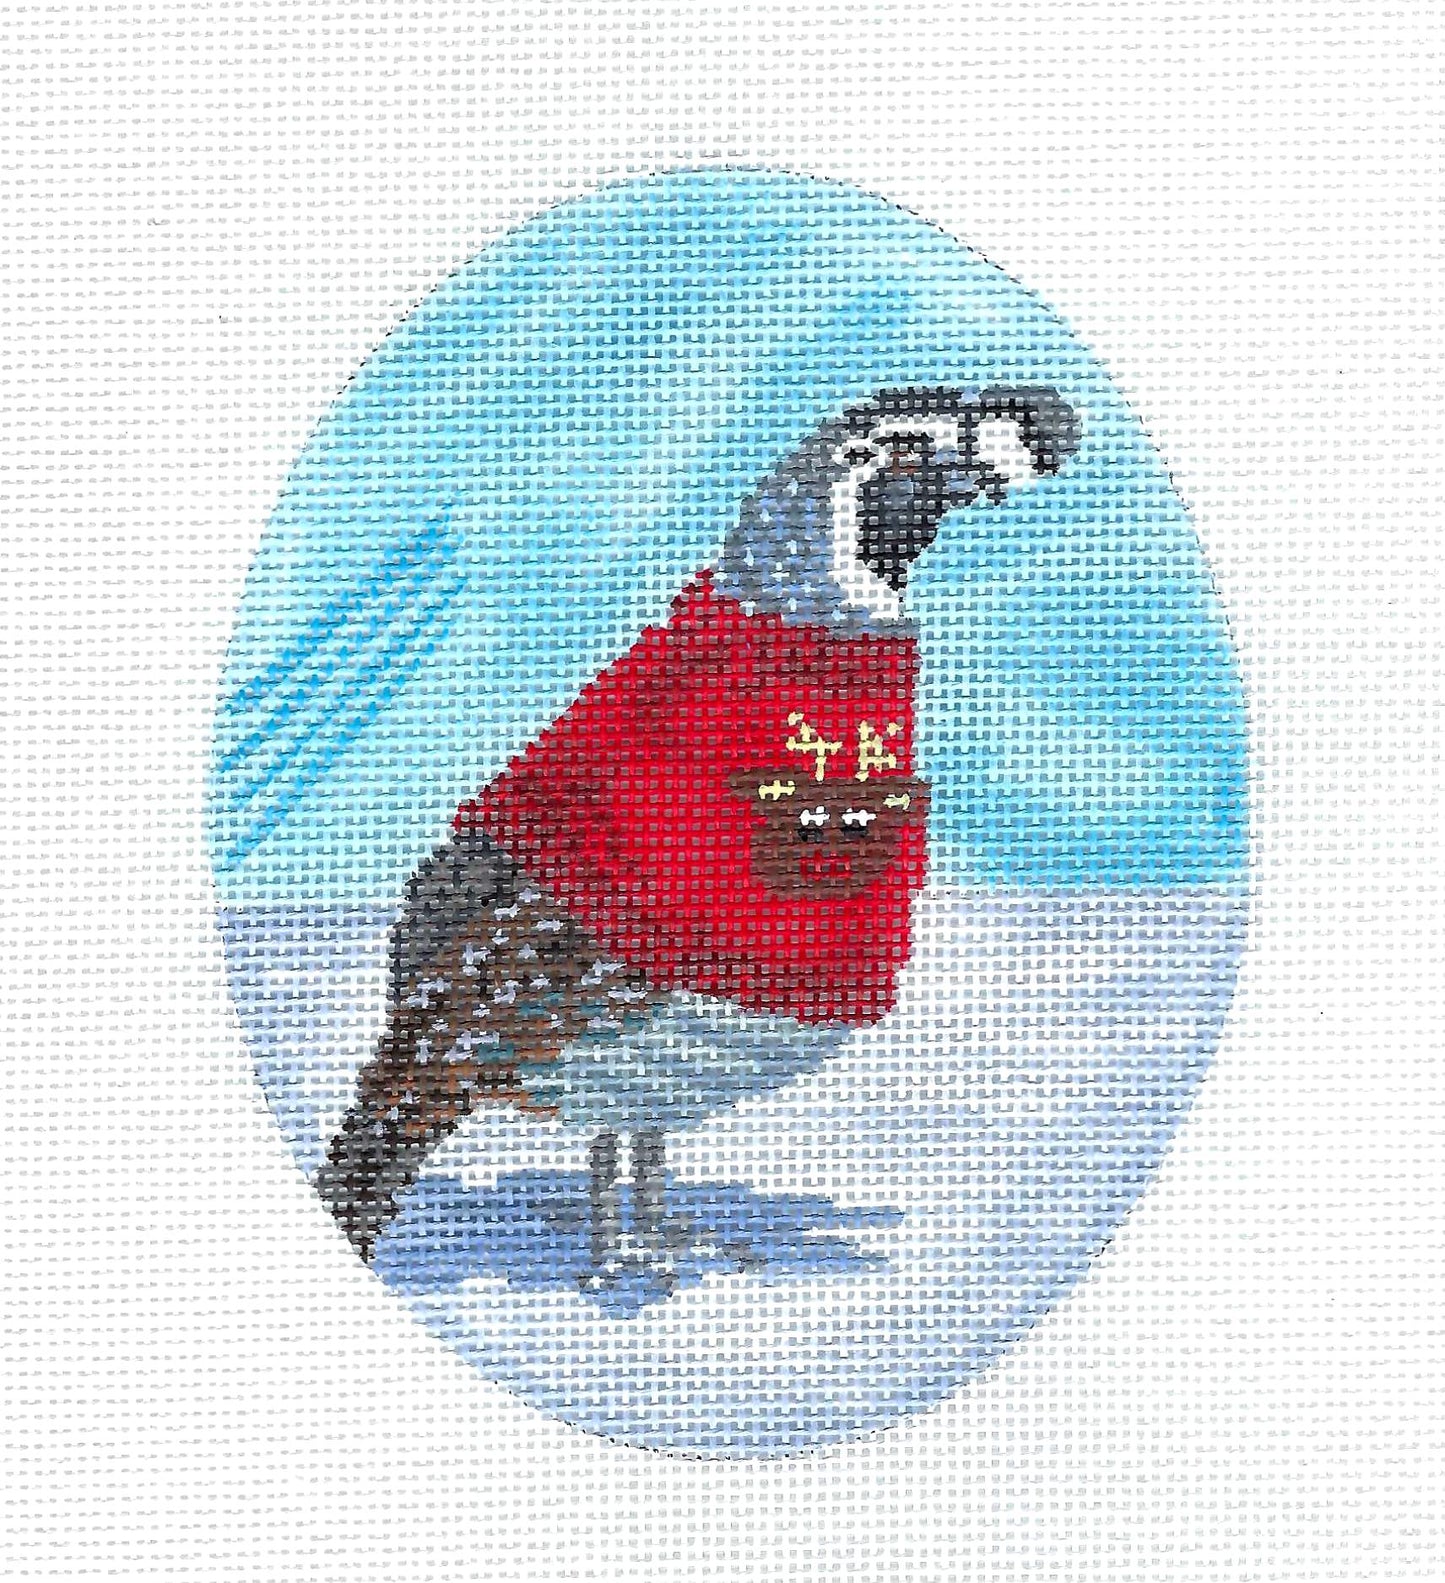 Bird canvas ~ Christmas Quail in Sweater handpainted Oval Needlepoint Canvas by Scott Church